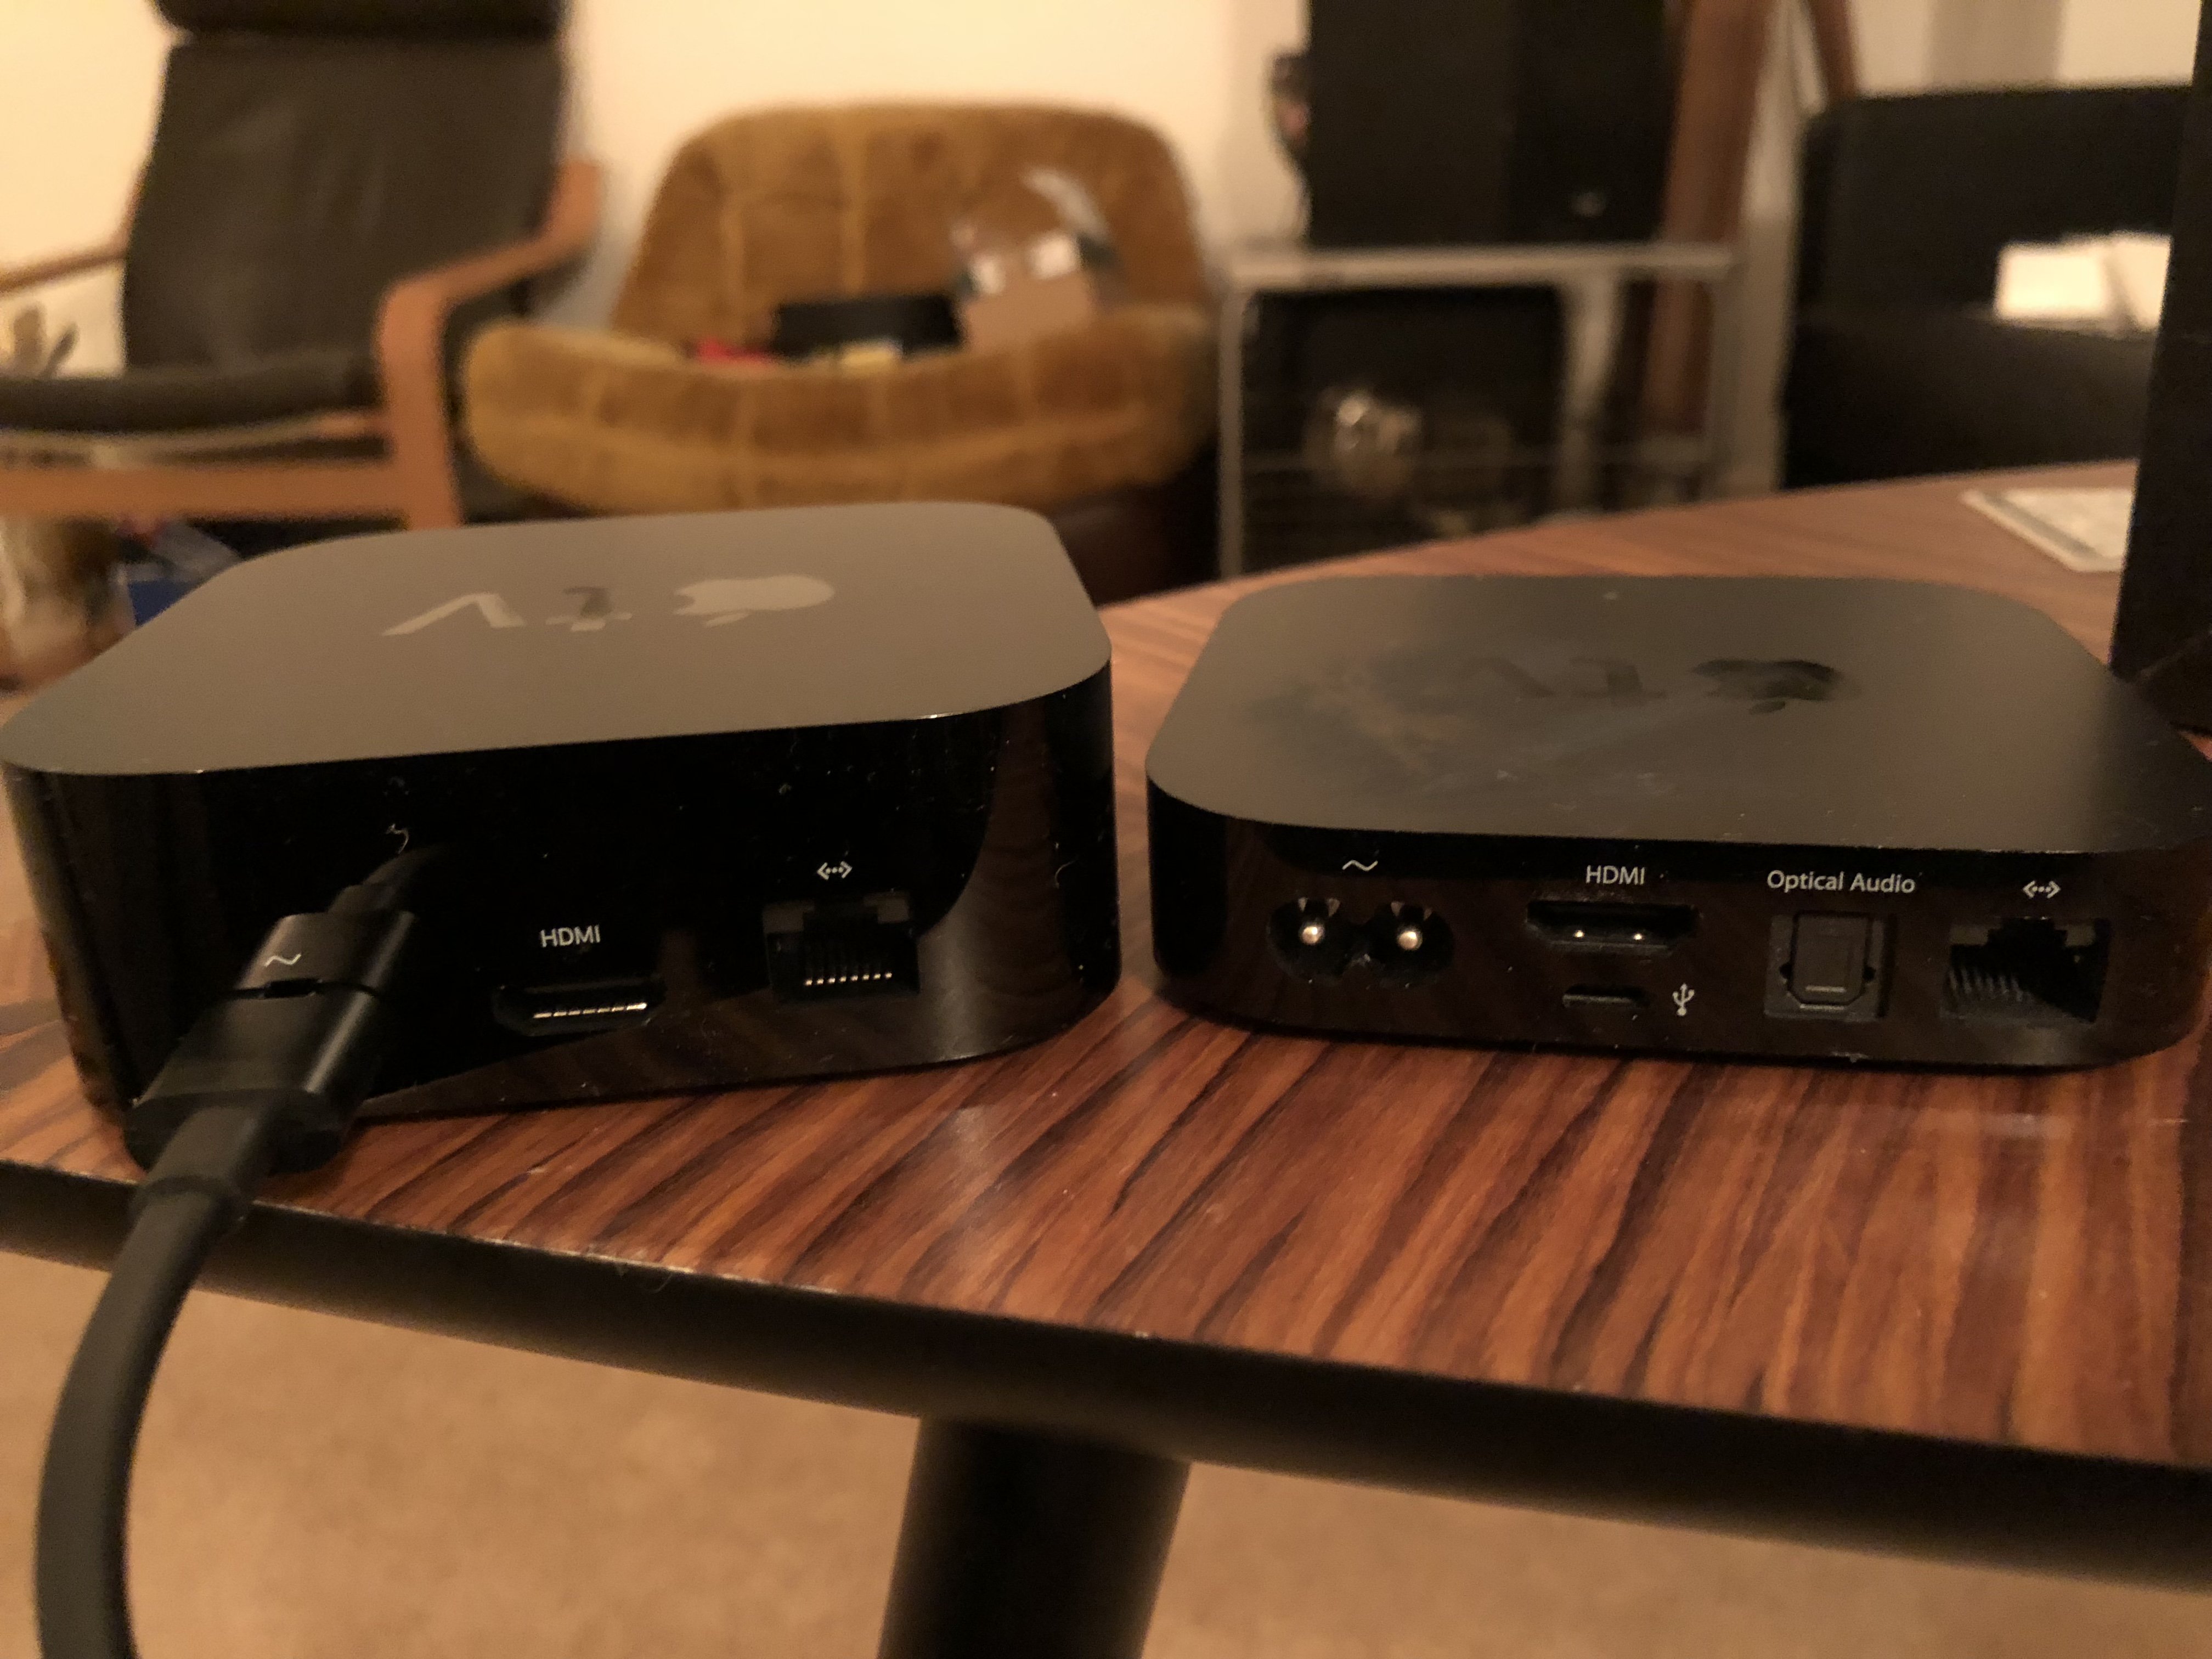 Andrew Reid on X: "Where the hell did the optical audio output go on the  Apple TV 4K?!? How are you supposed to use it with a projector and amp?!  https://t.co/dPnSVtMl4P" /